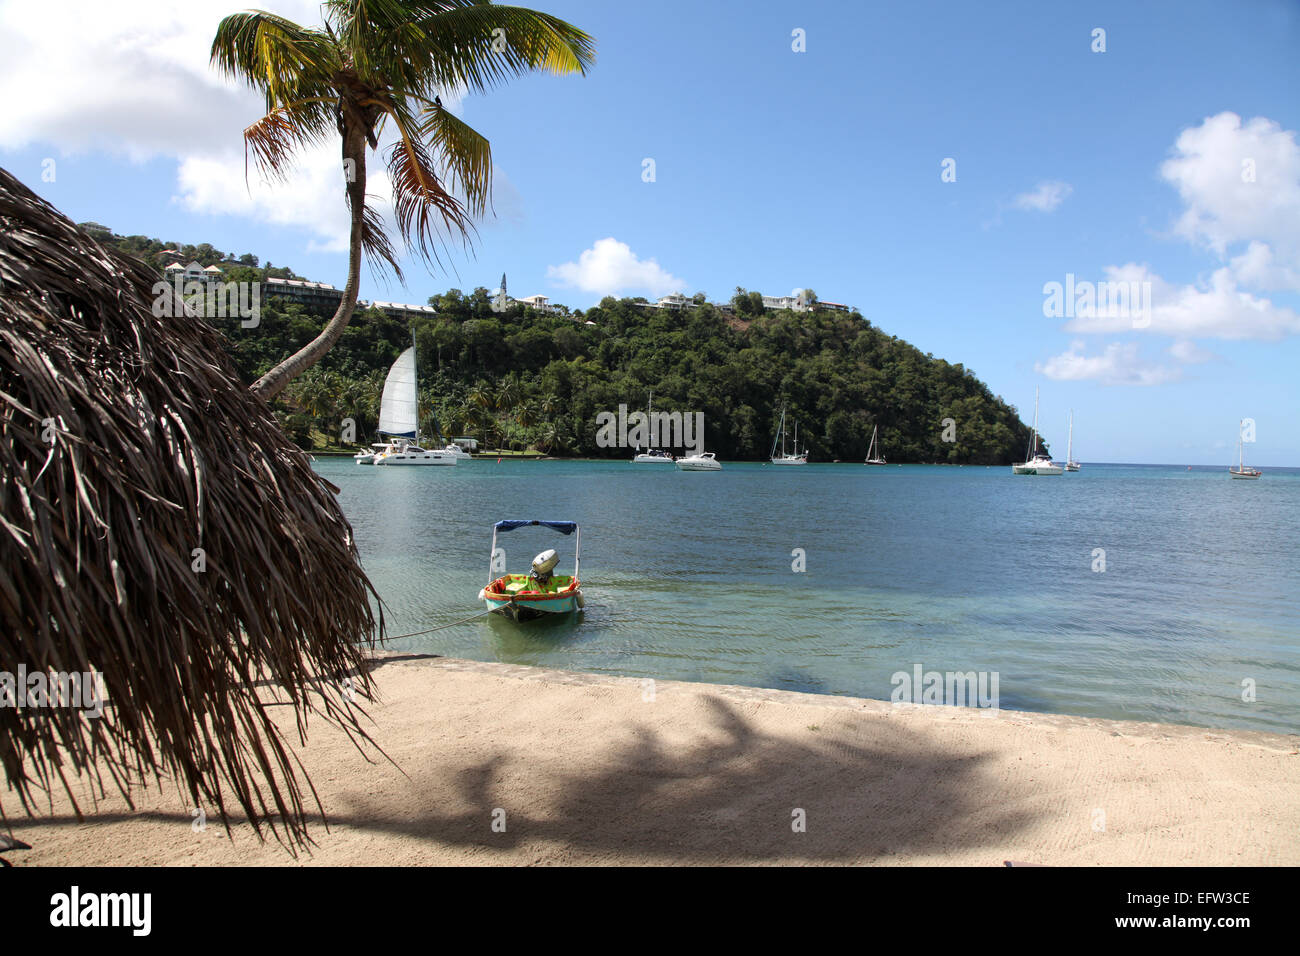 A tranquil scene at Marigot Bay, St. Lucia Stock Photo